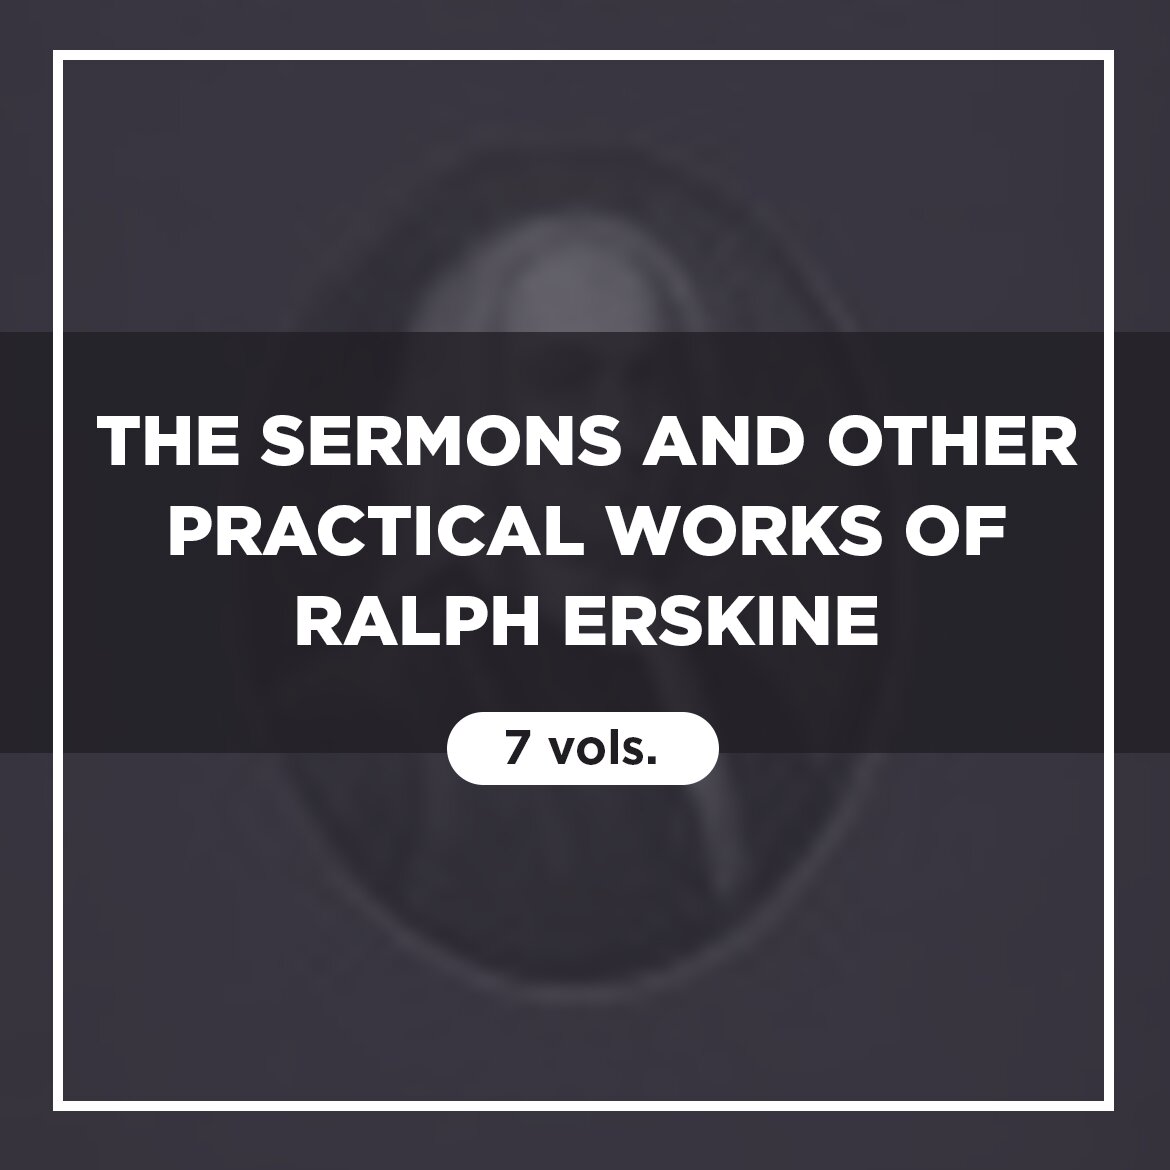 The Sermons and other Practical Works of Ralph Erskine (7 vols.)